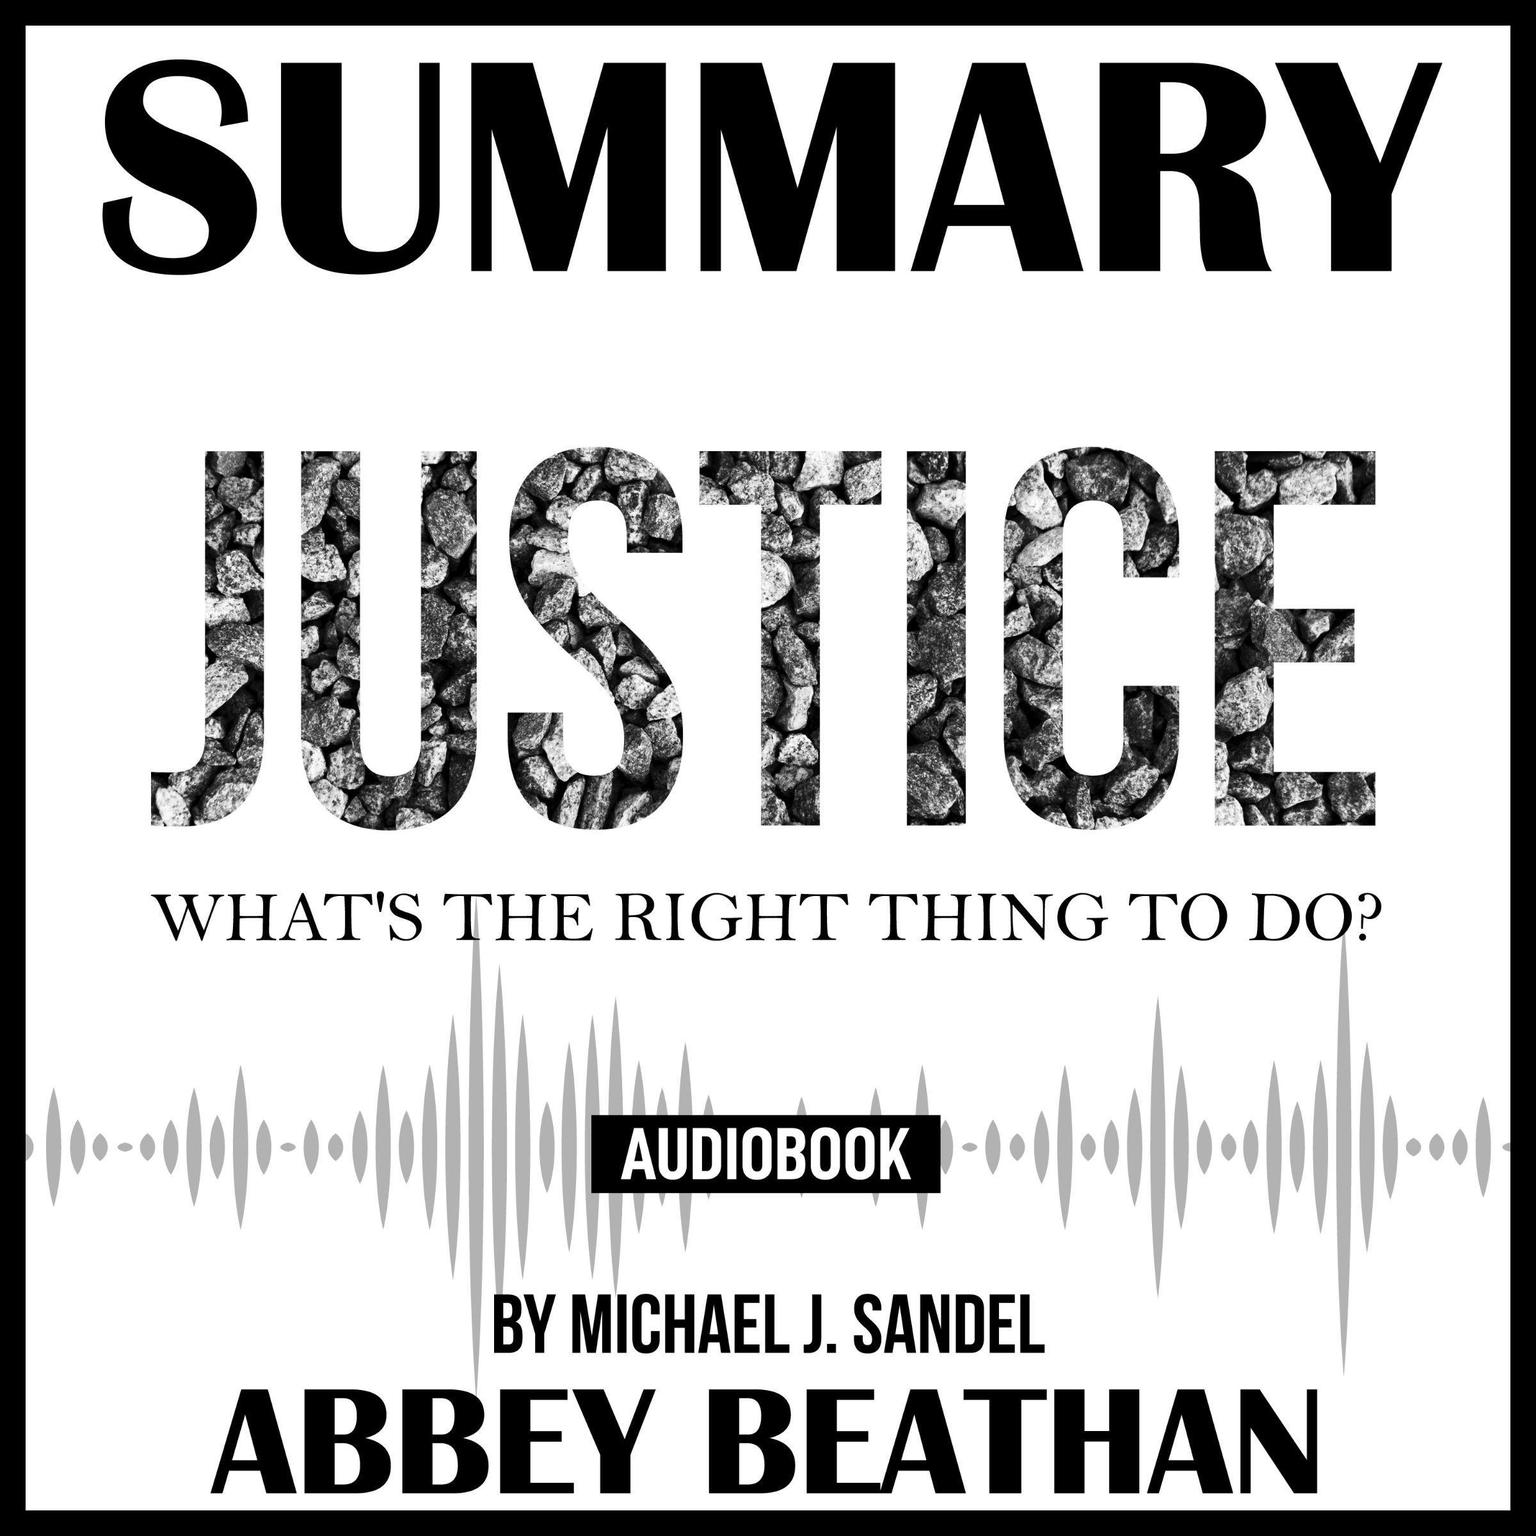 Summary of Justice: Whats the Right Thing to Do? by Michael J. Sandel Audiobook, by Abbey Beathan